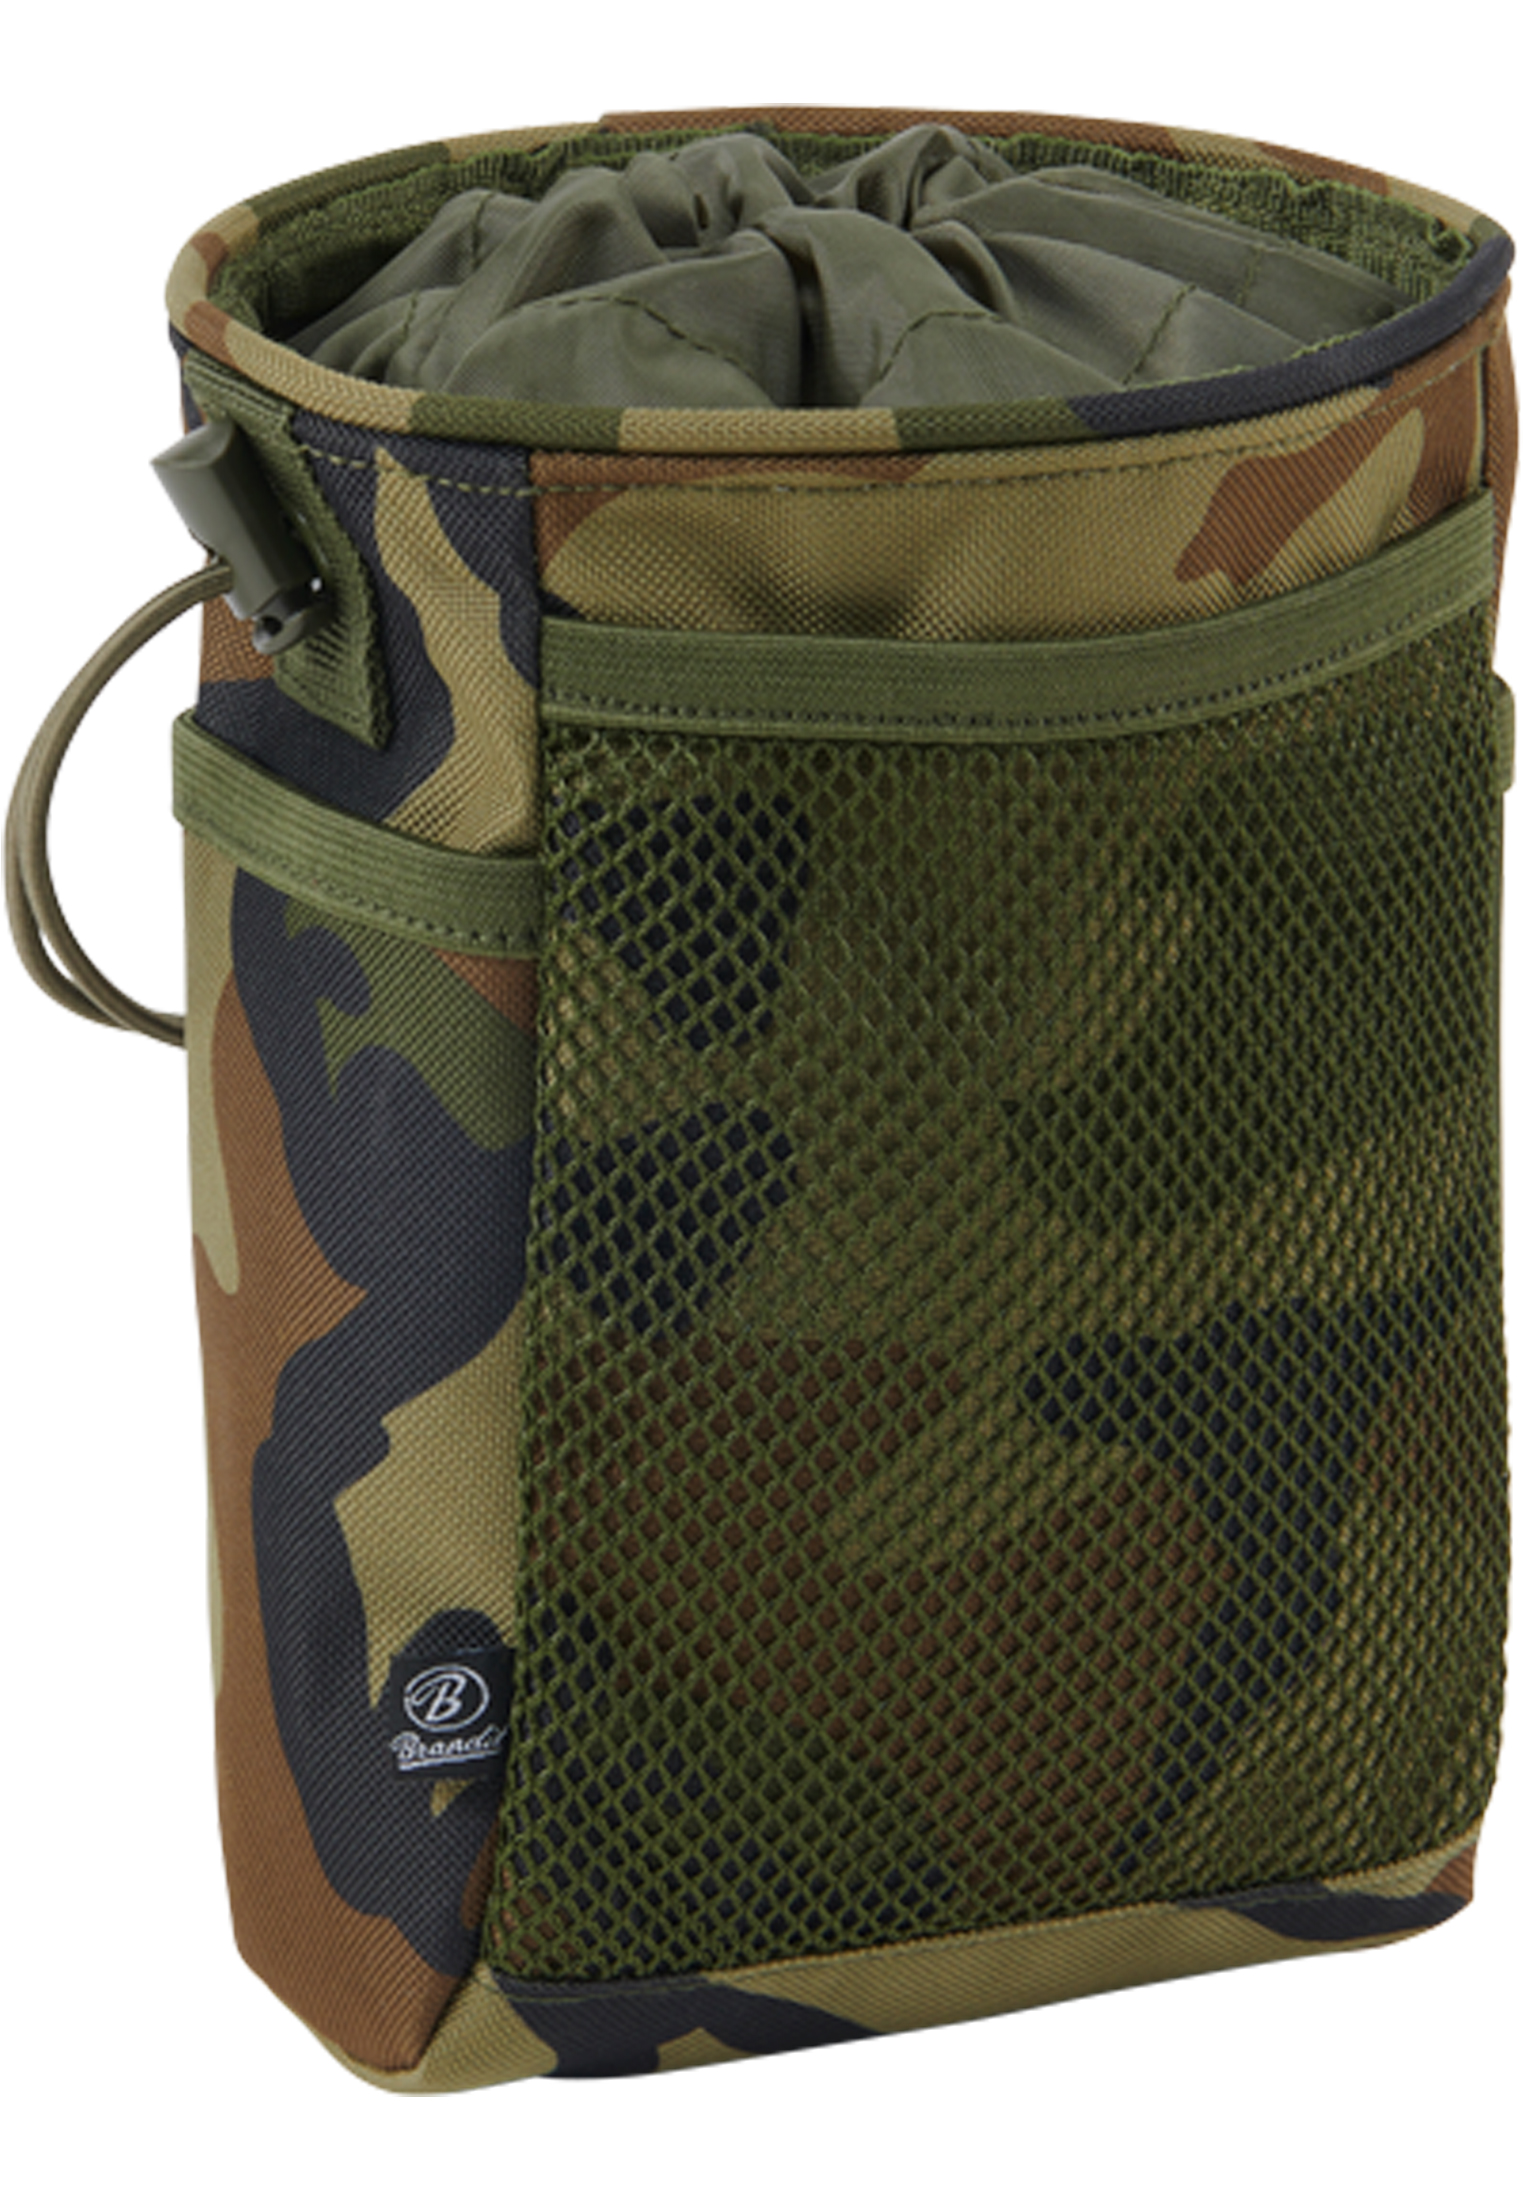 Taschen Molle Pouch Tactical in Farbe olive camo